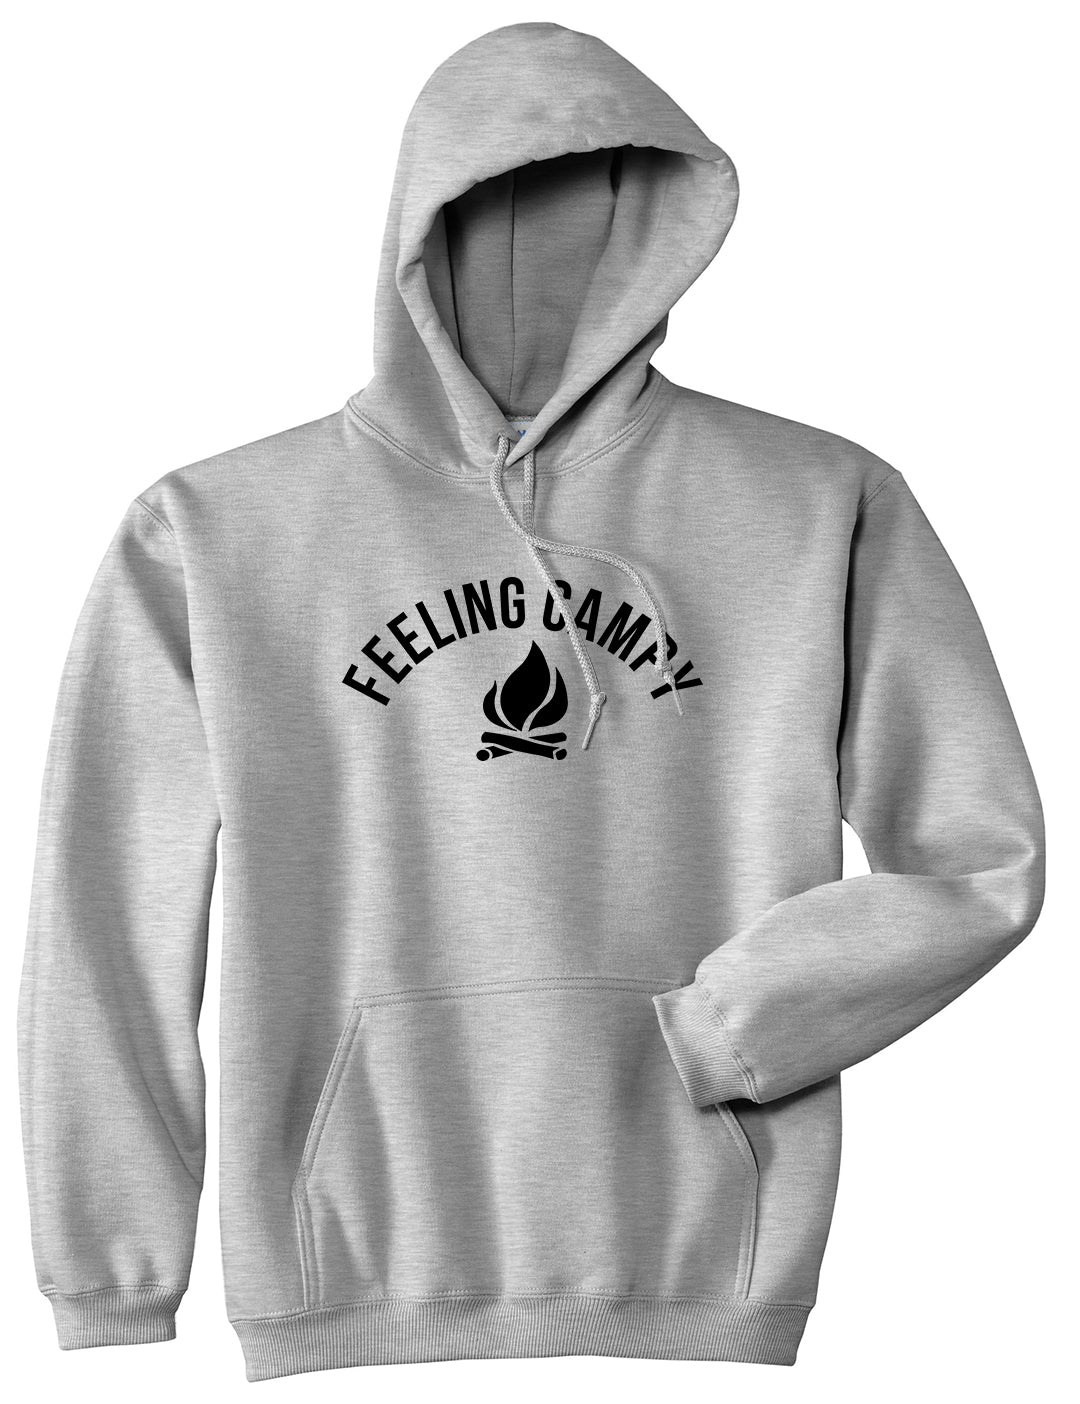 Feeling Campy Camp Fire Outdoor Mens Pullover Hoodie Grey